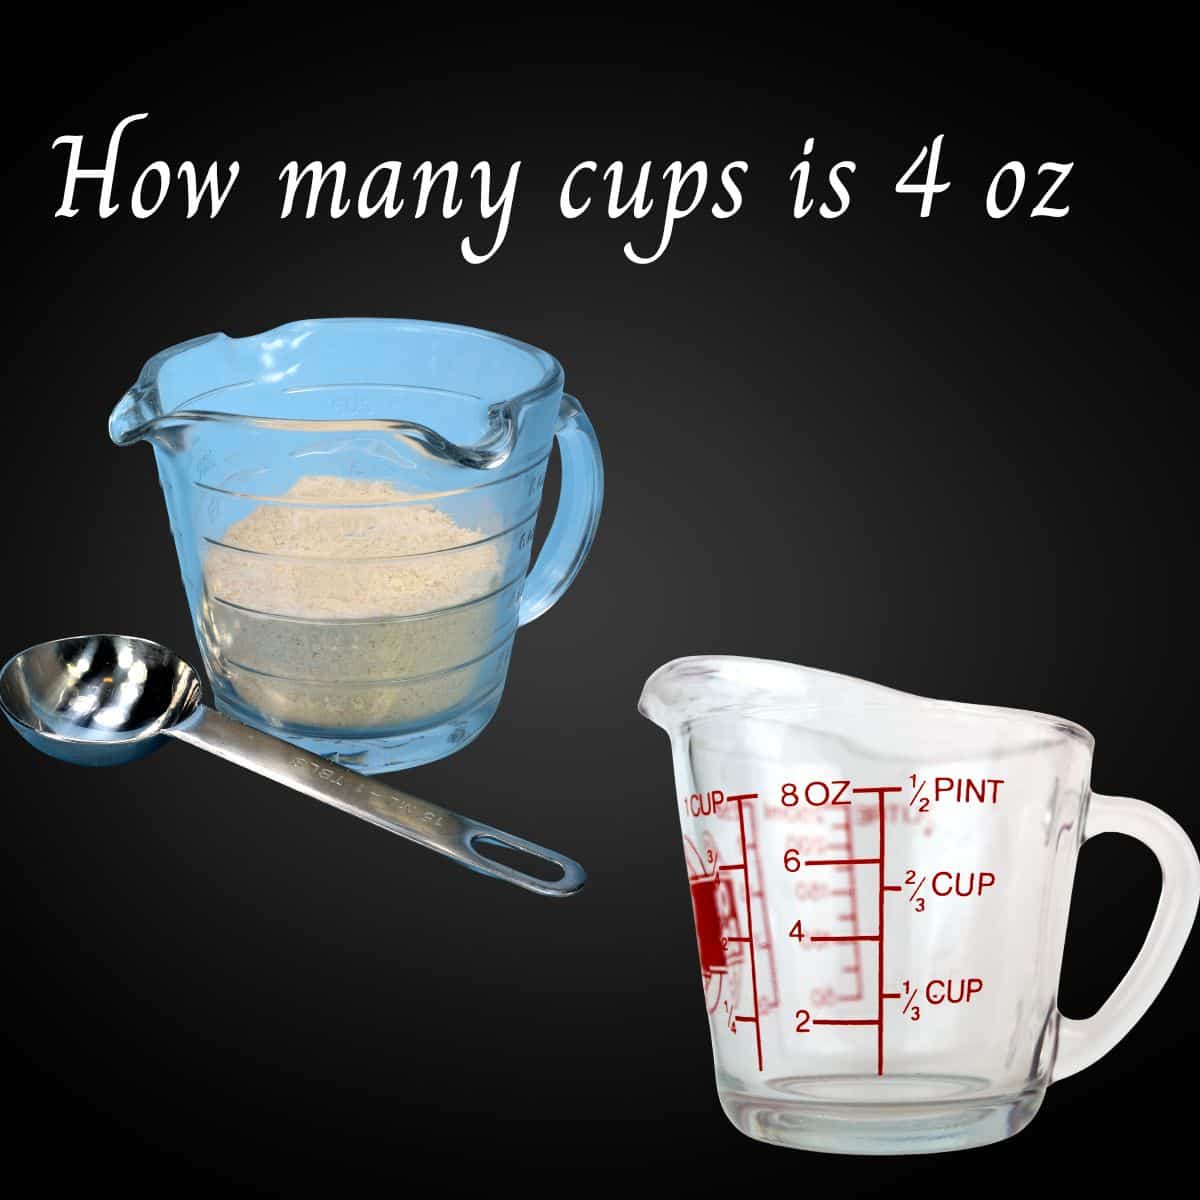 measuring cups in image with a tablespoon to show how many cups are in 4 oz